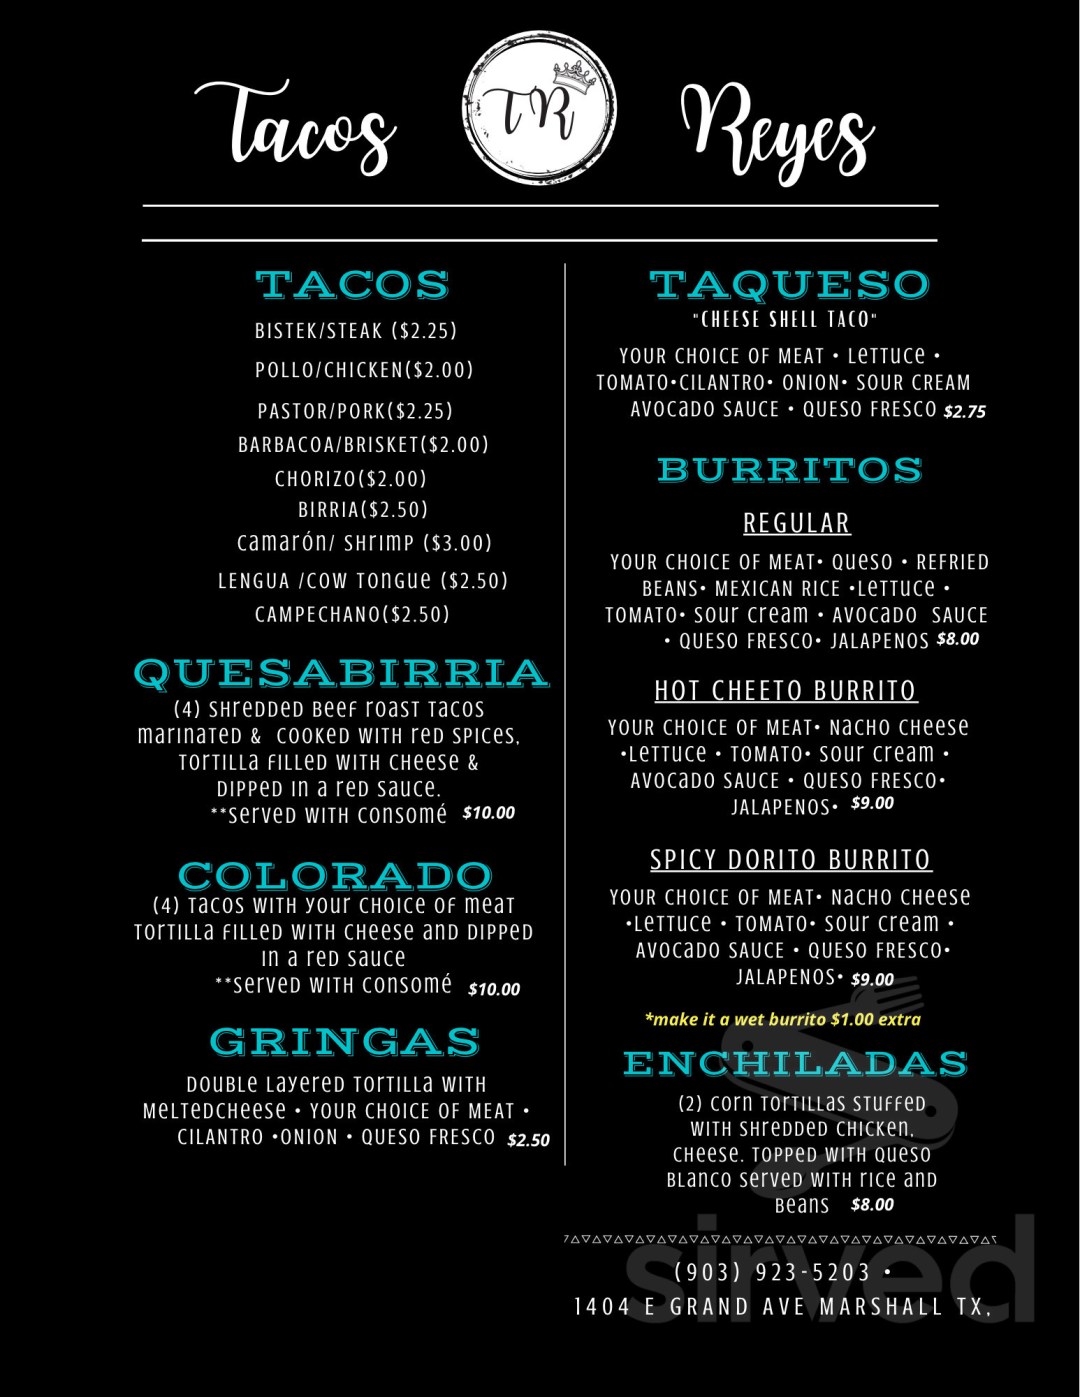 Picture of: Tacos Reyes Restaurant menu in Marshall, Texas, USA